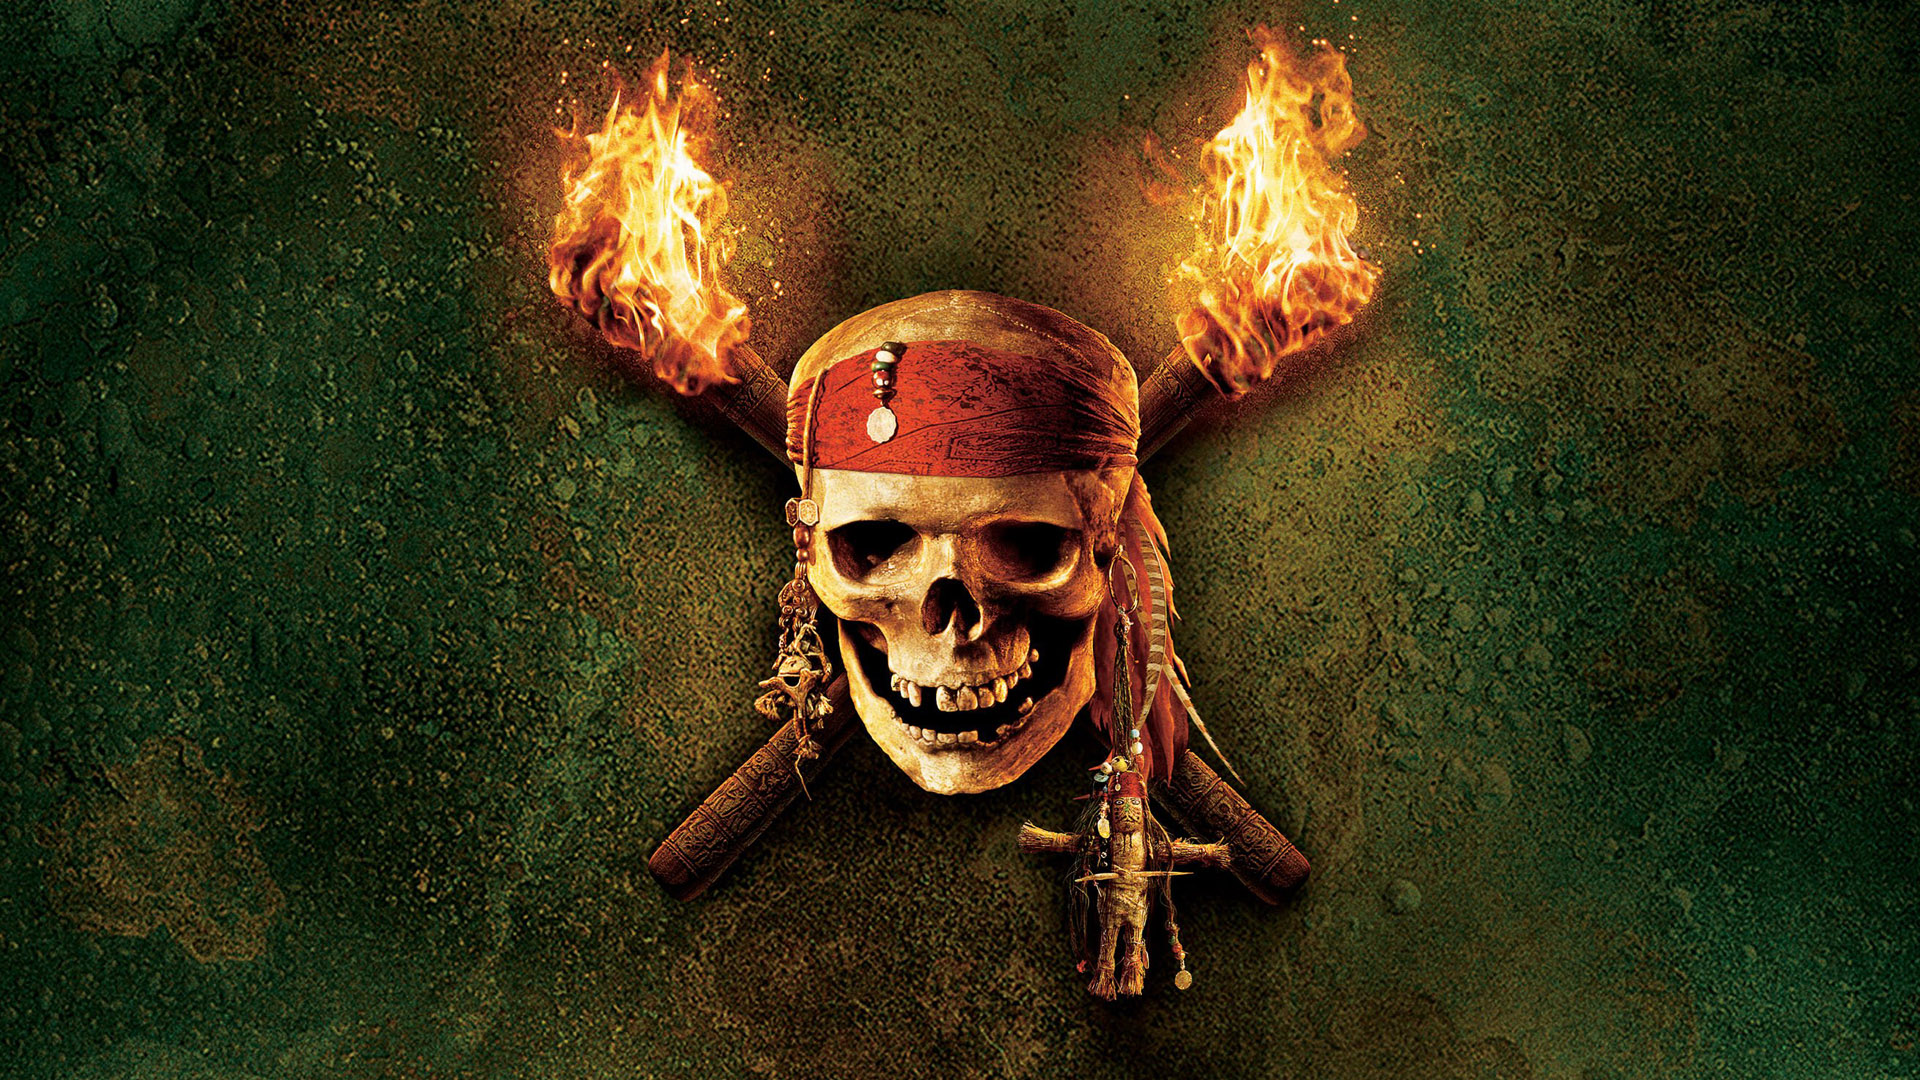 pirates of the caribbean, movie, pirates of the caribbean: dead man's chest cell phone wallpapers